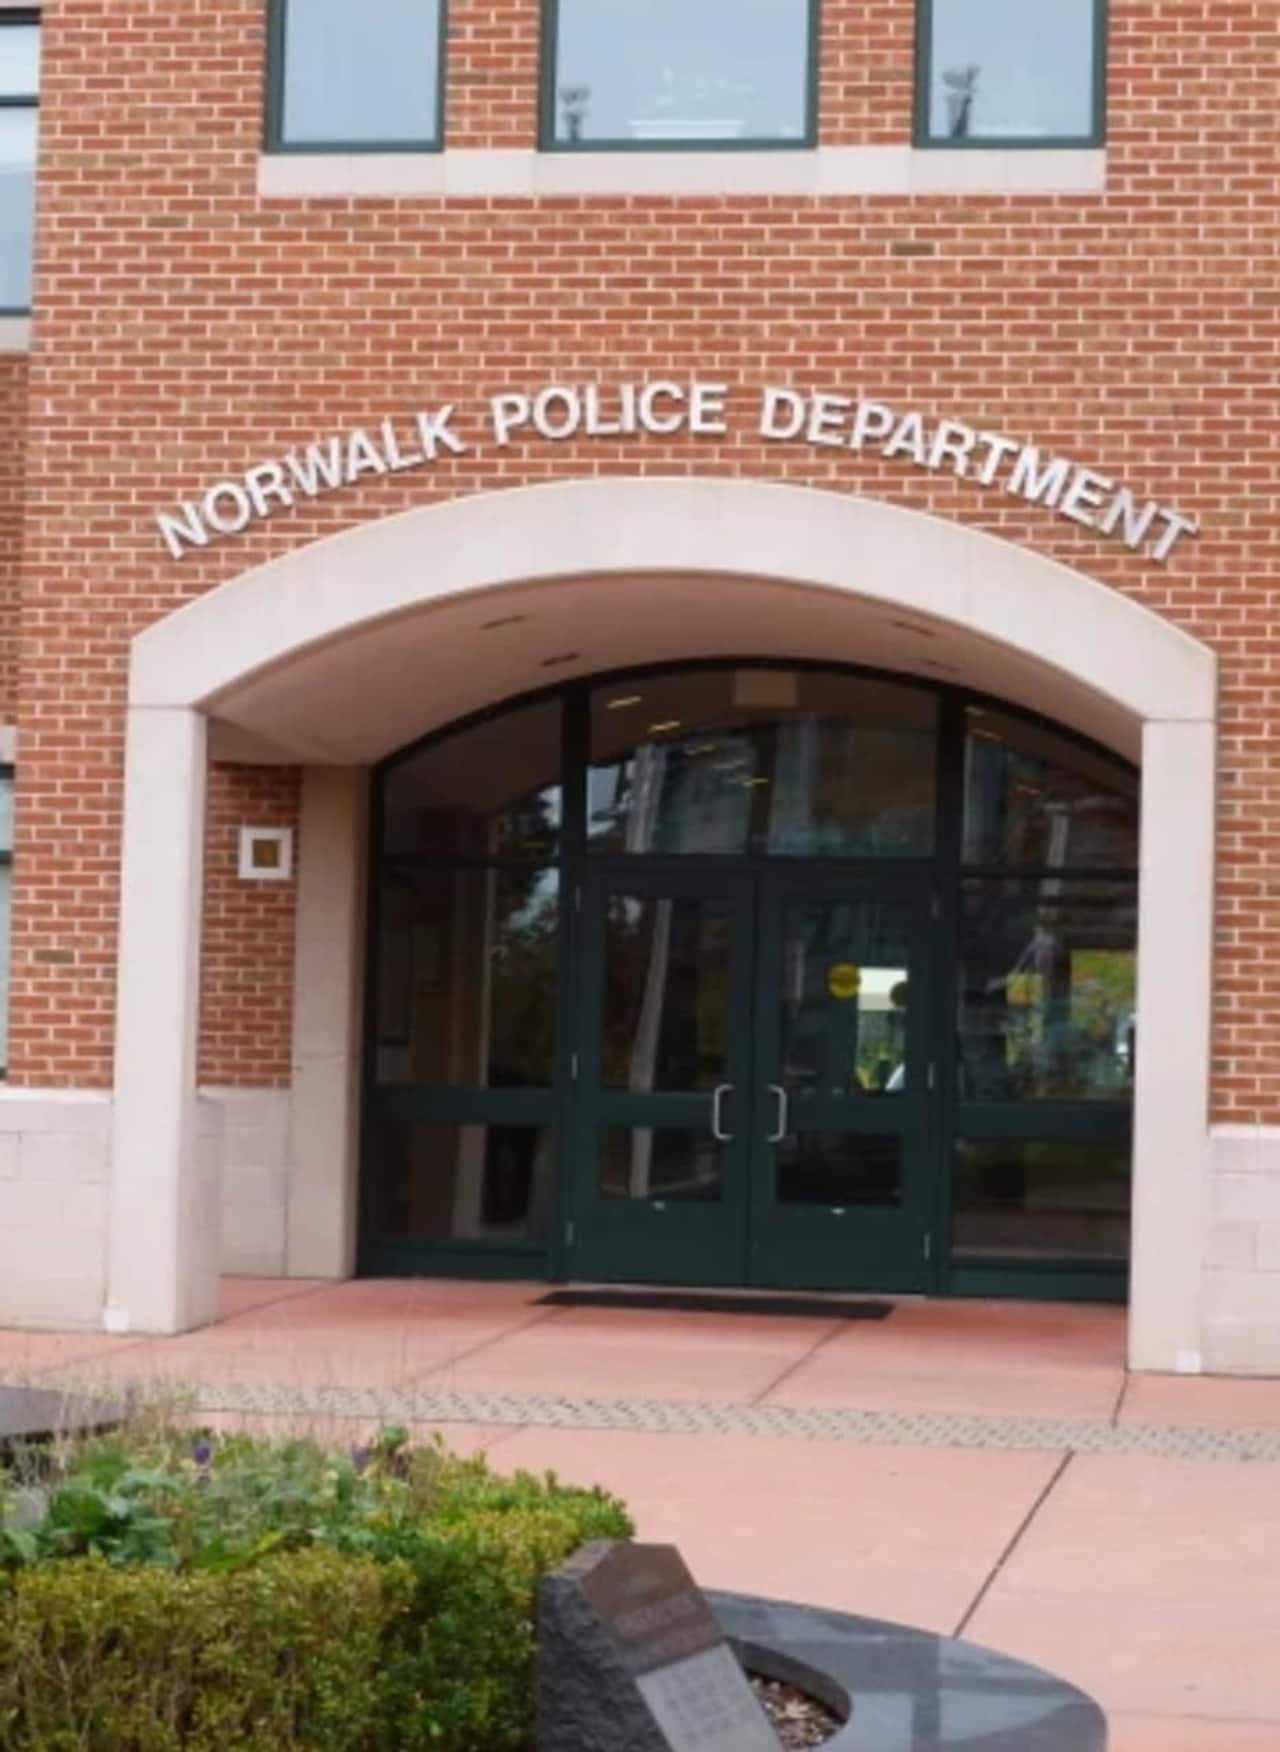 Norwalk Police Department arrested two in connection with dispute in lounge.